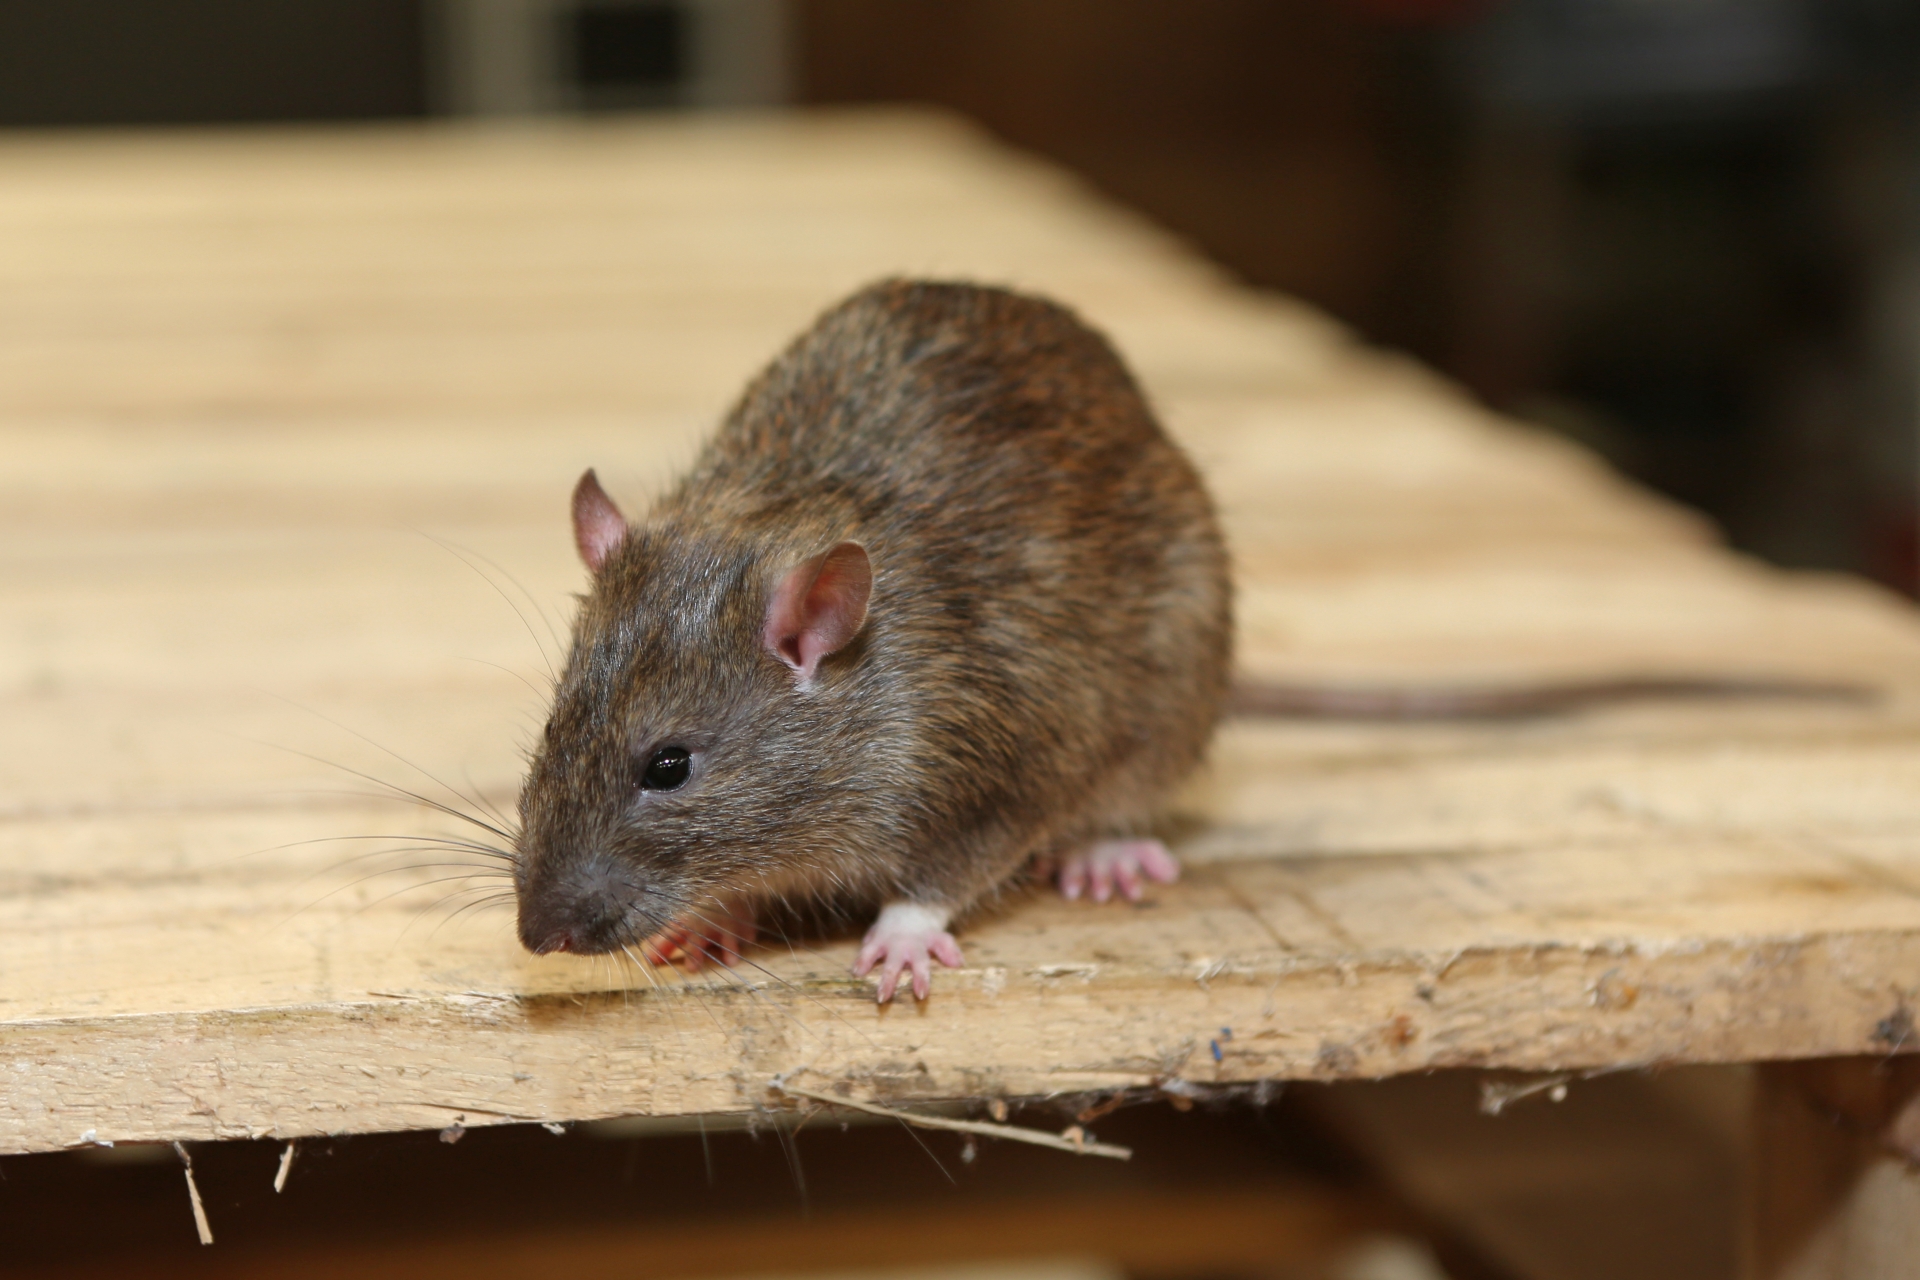 Rat Control, Pest Control in Streatham, SW16. Call Now 020 8166 9746